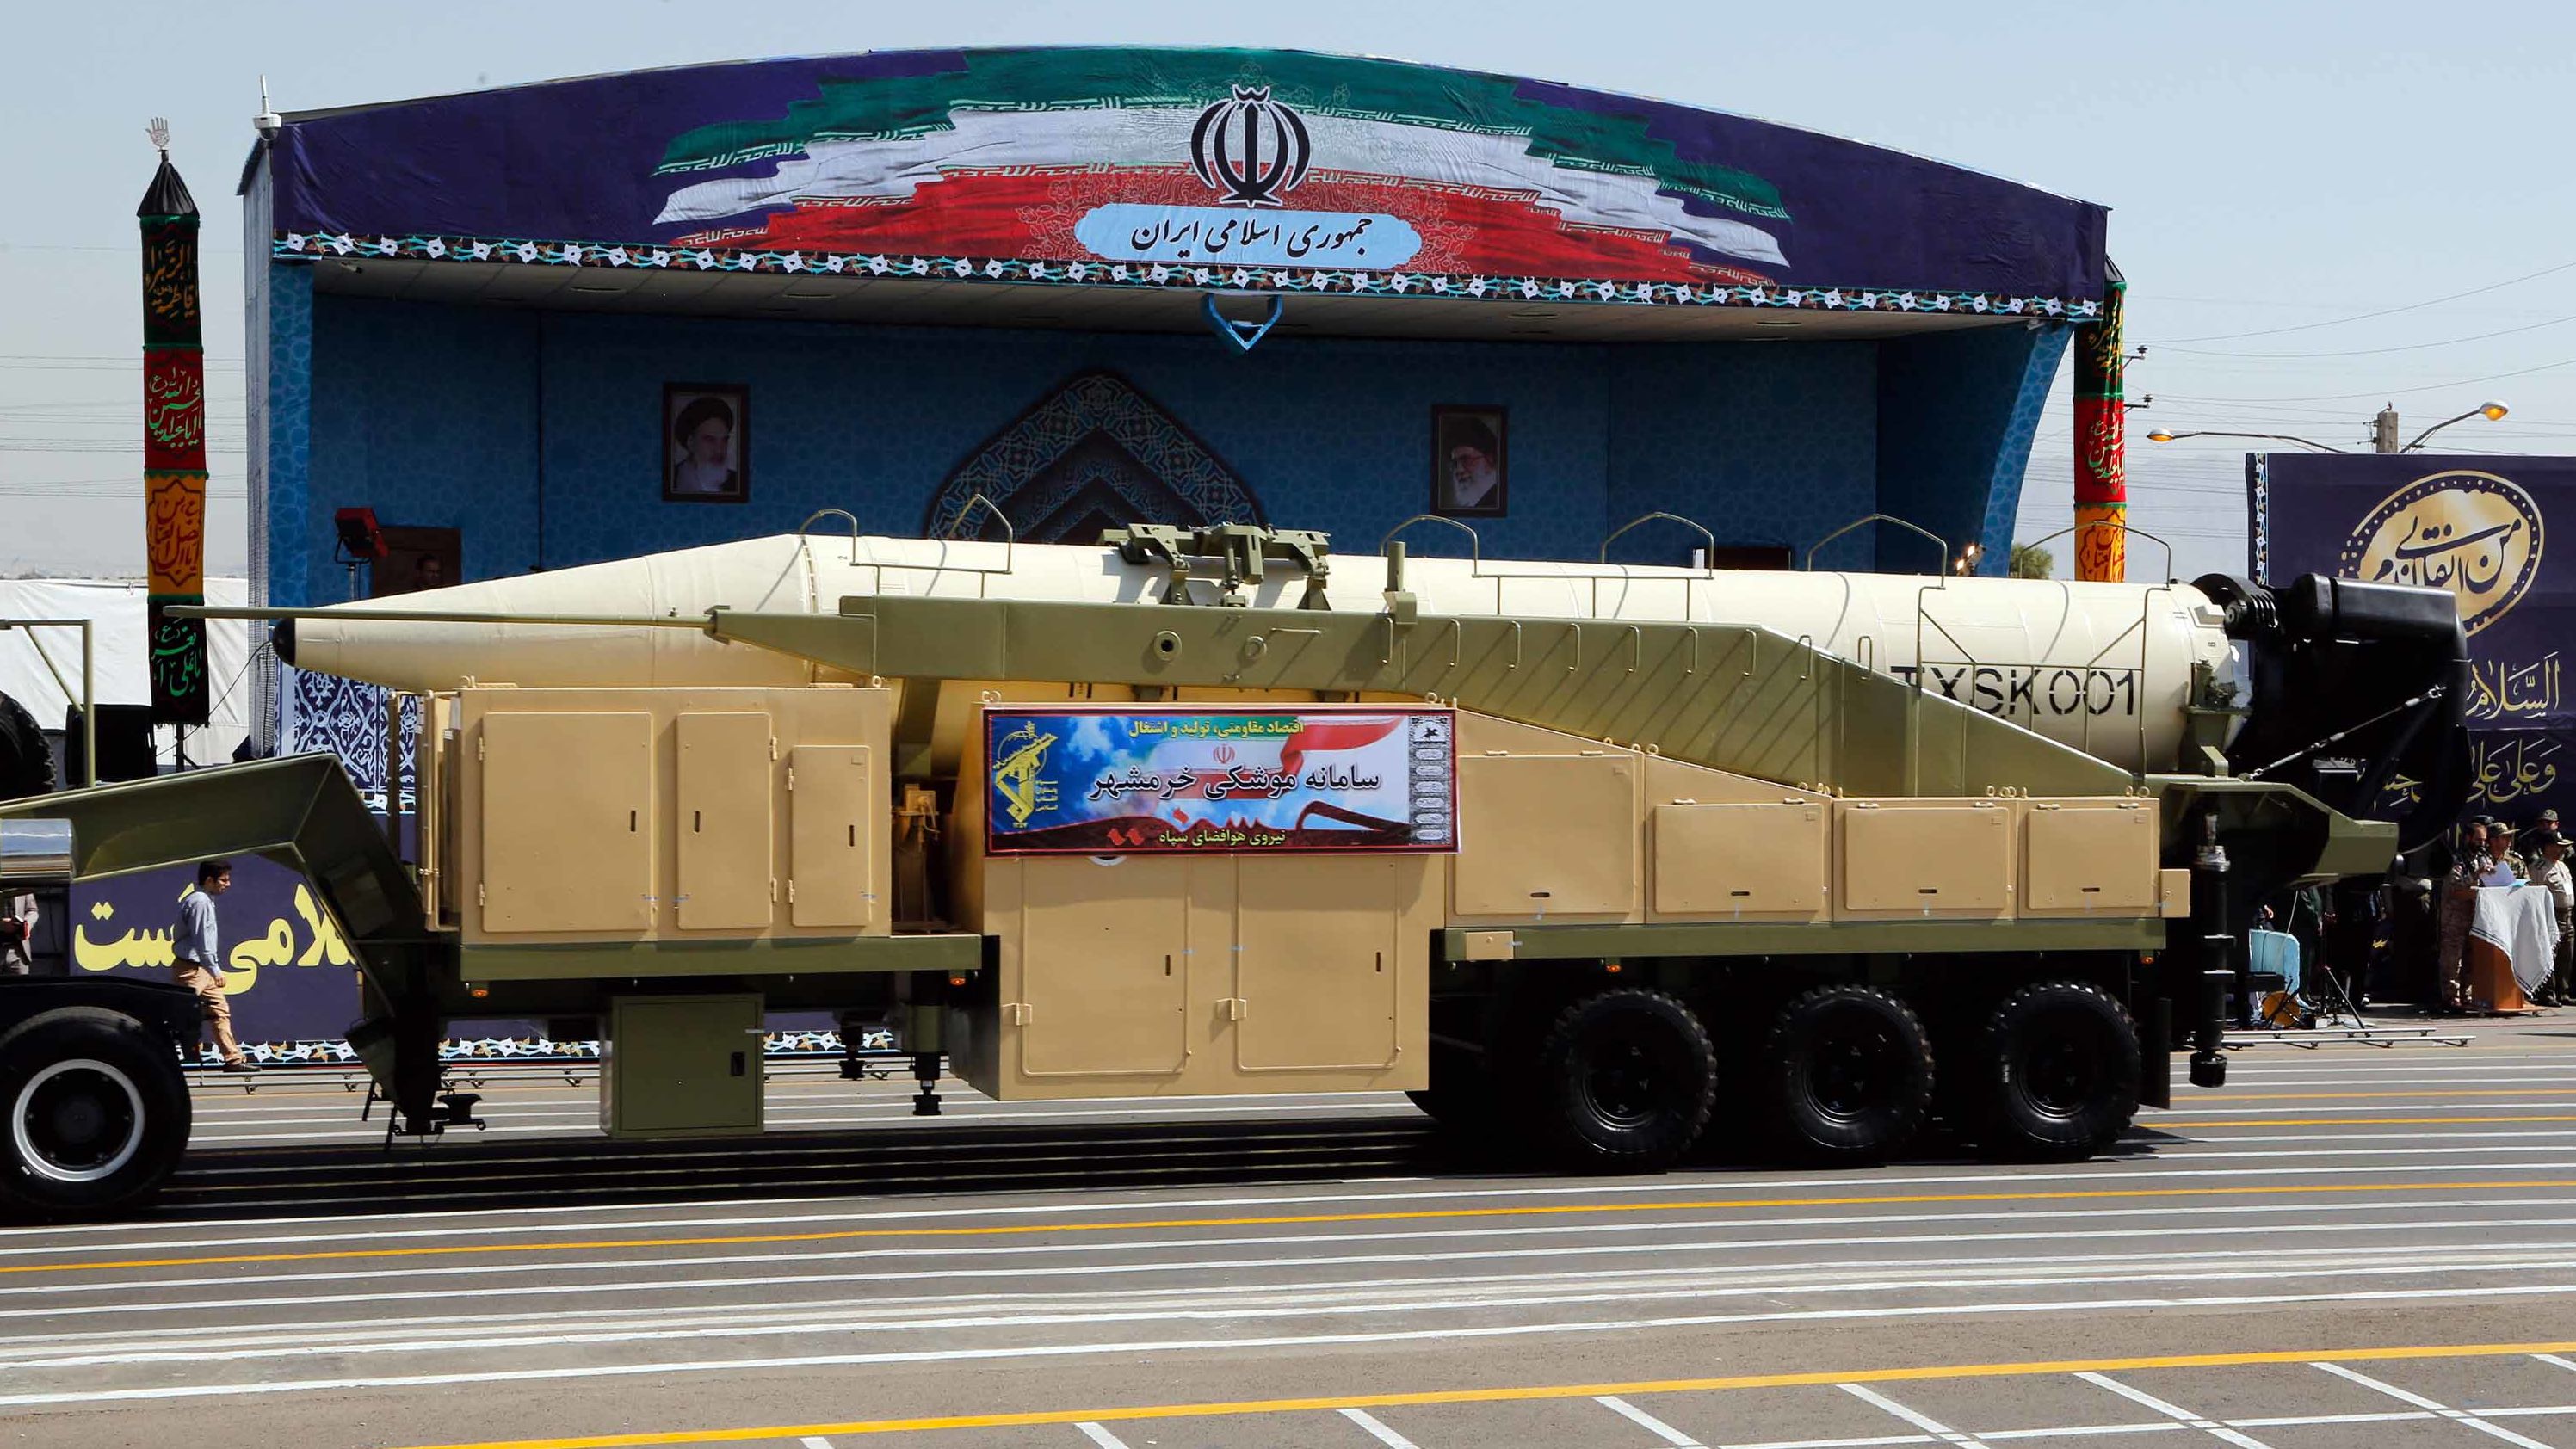 The new Iranian missile Khorramshahr is displayed during a military parade Friday in Tehran.